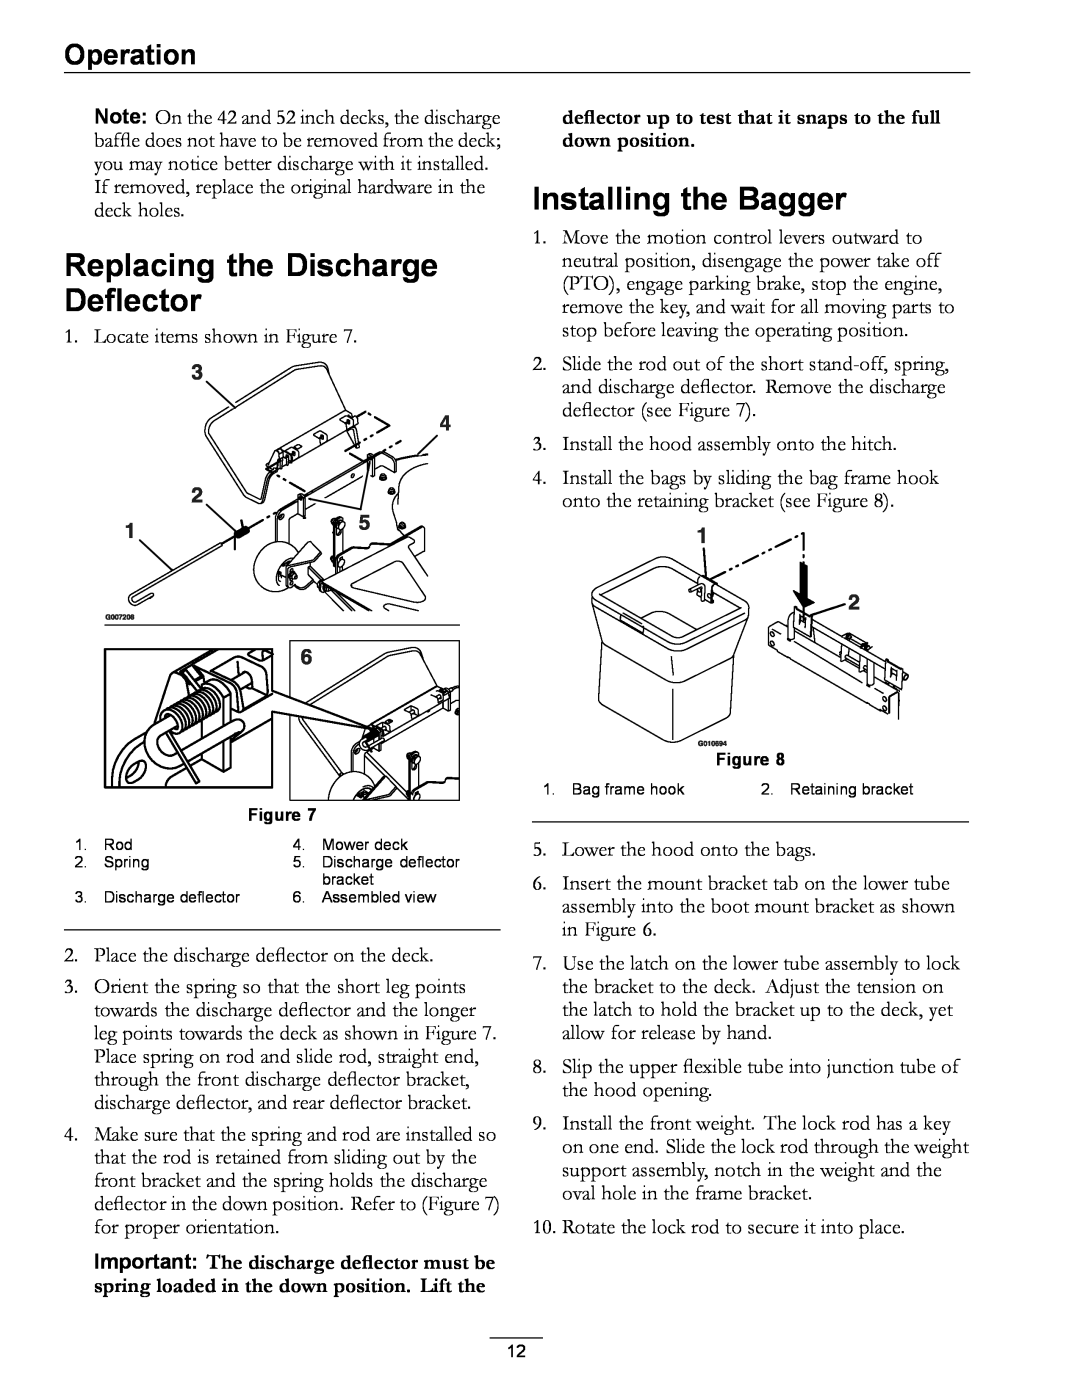 Exmark 4500-438 rev. a manual Replacing the Discharge Deflector, Installing the Bagger, Operation 